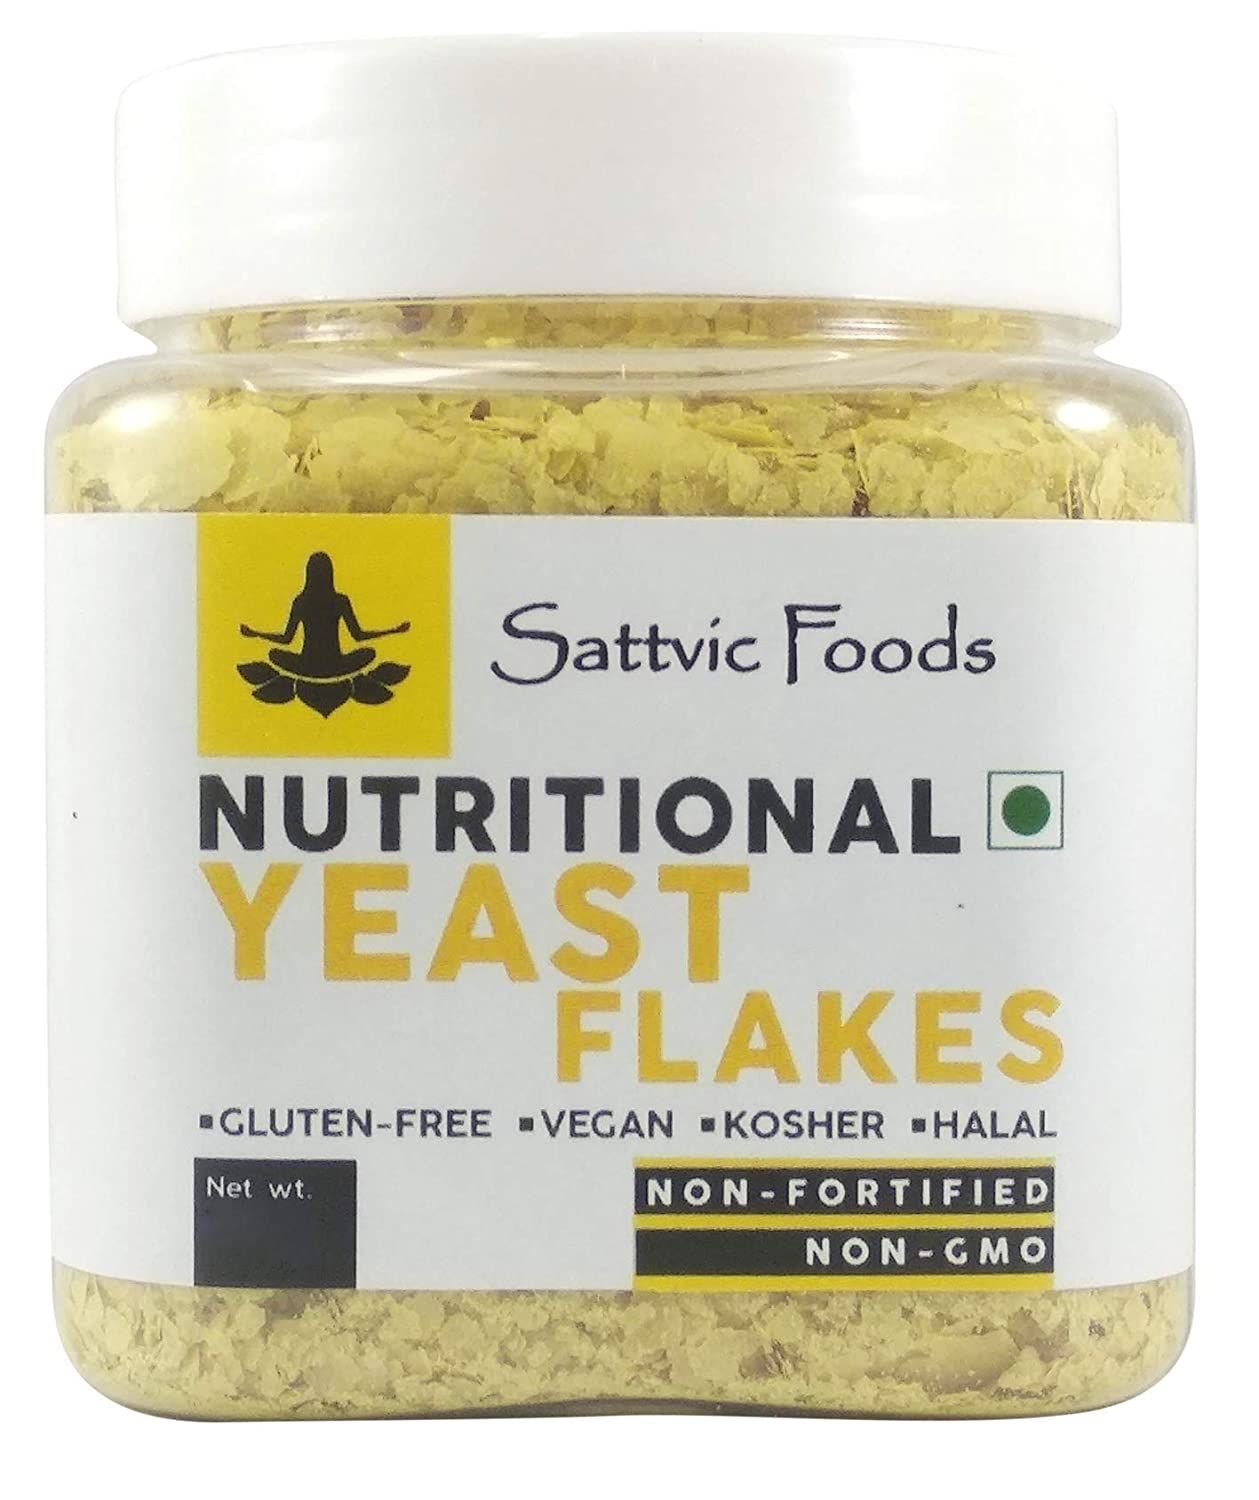 Sattvic Foods Nutritional Yeast Flakes Image